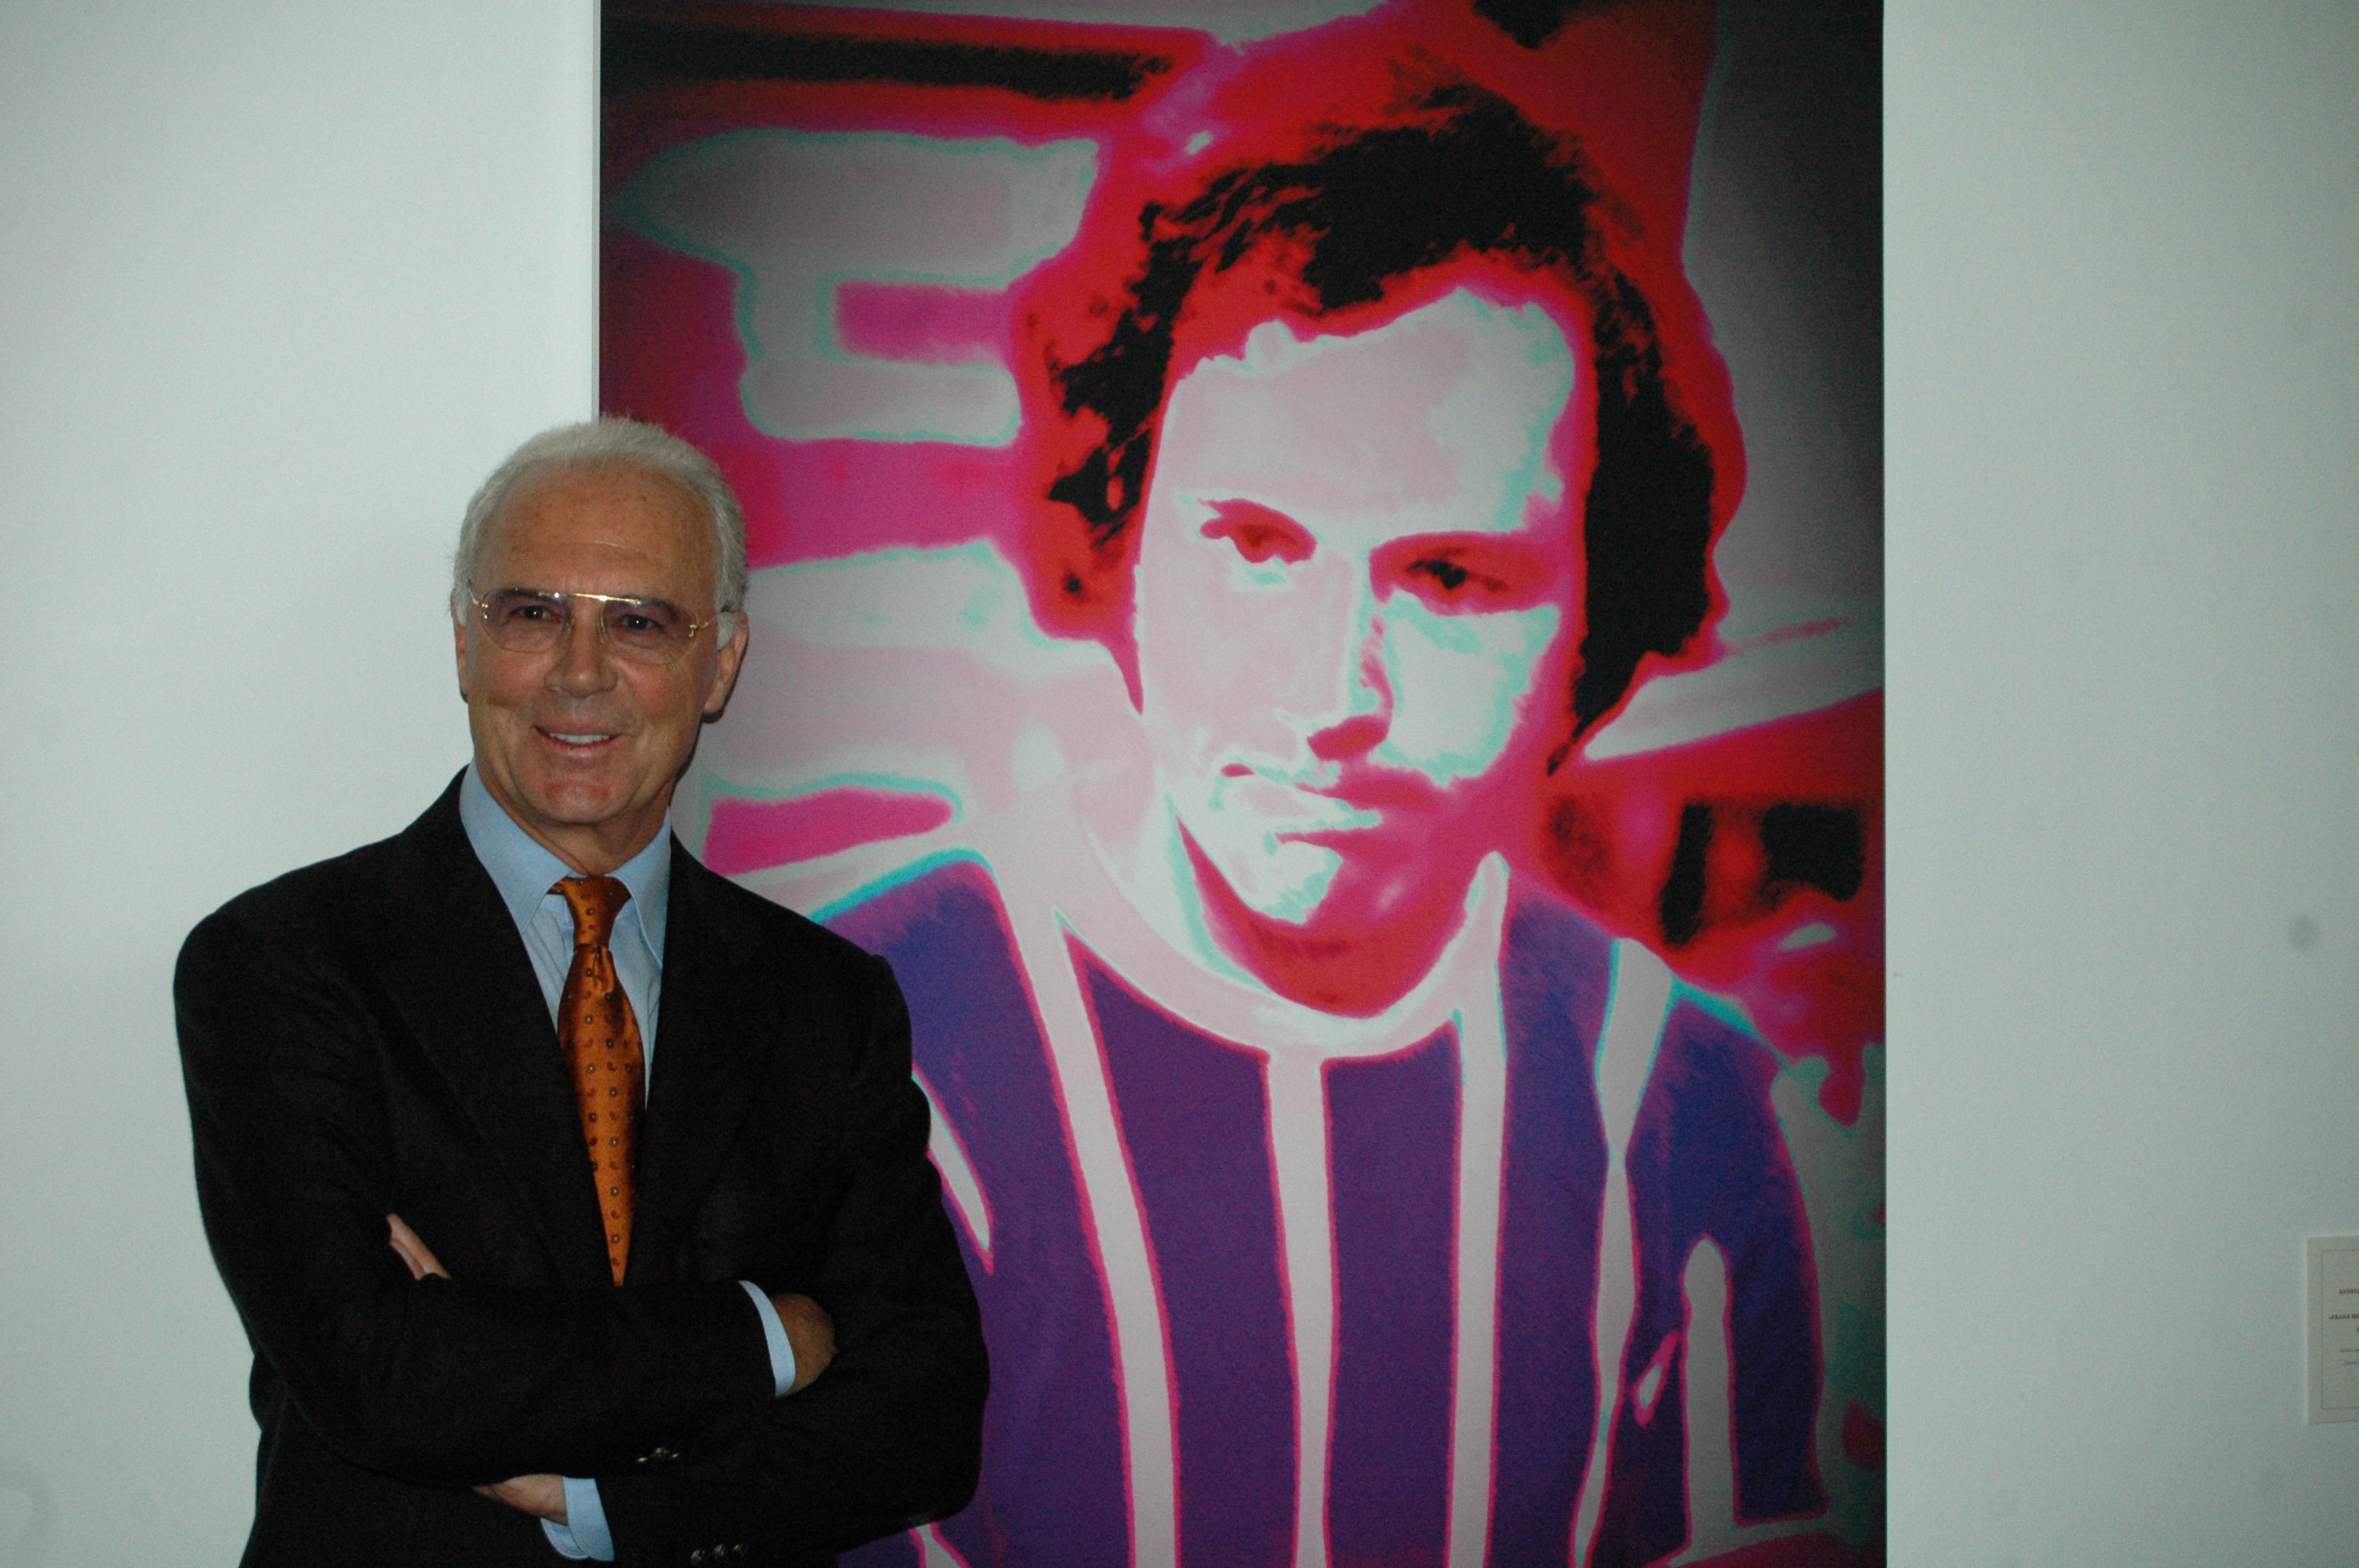 Franz Beckenbauer at the unveiling of a portrait painting of him in Berlin in 2006.